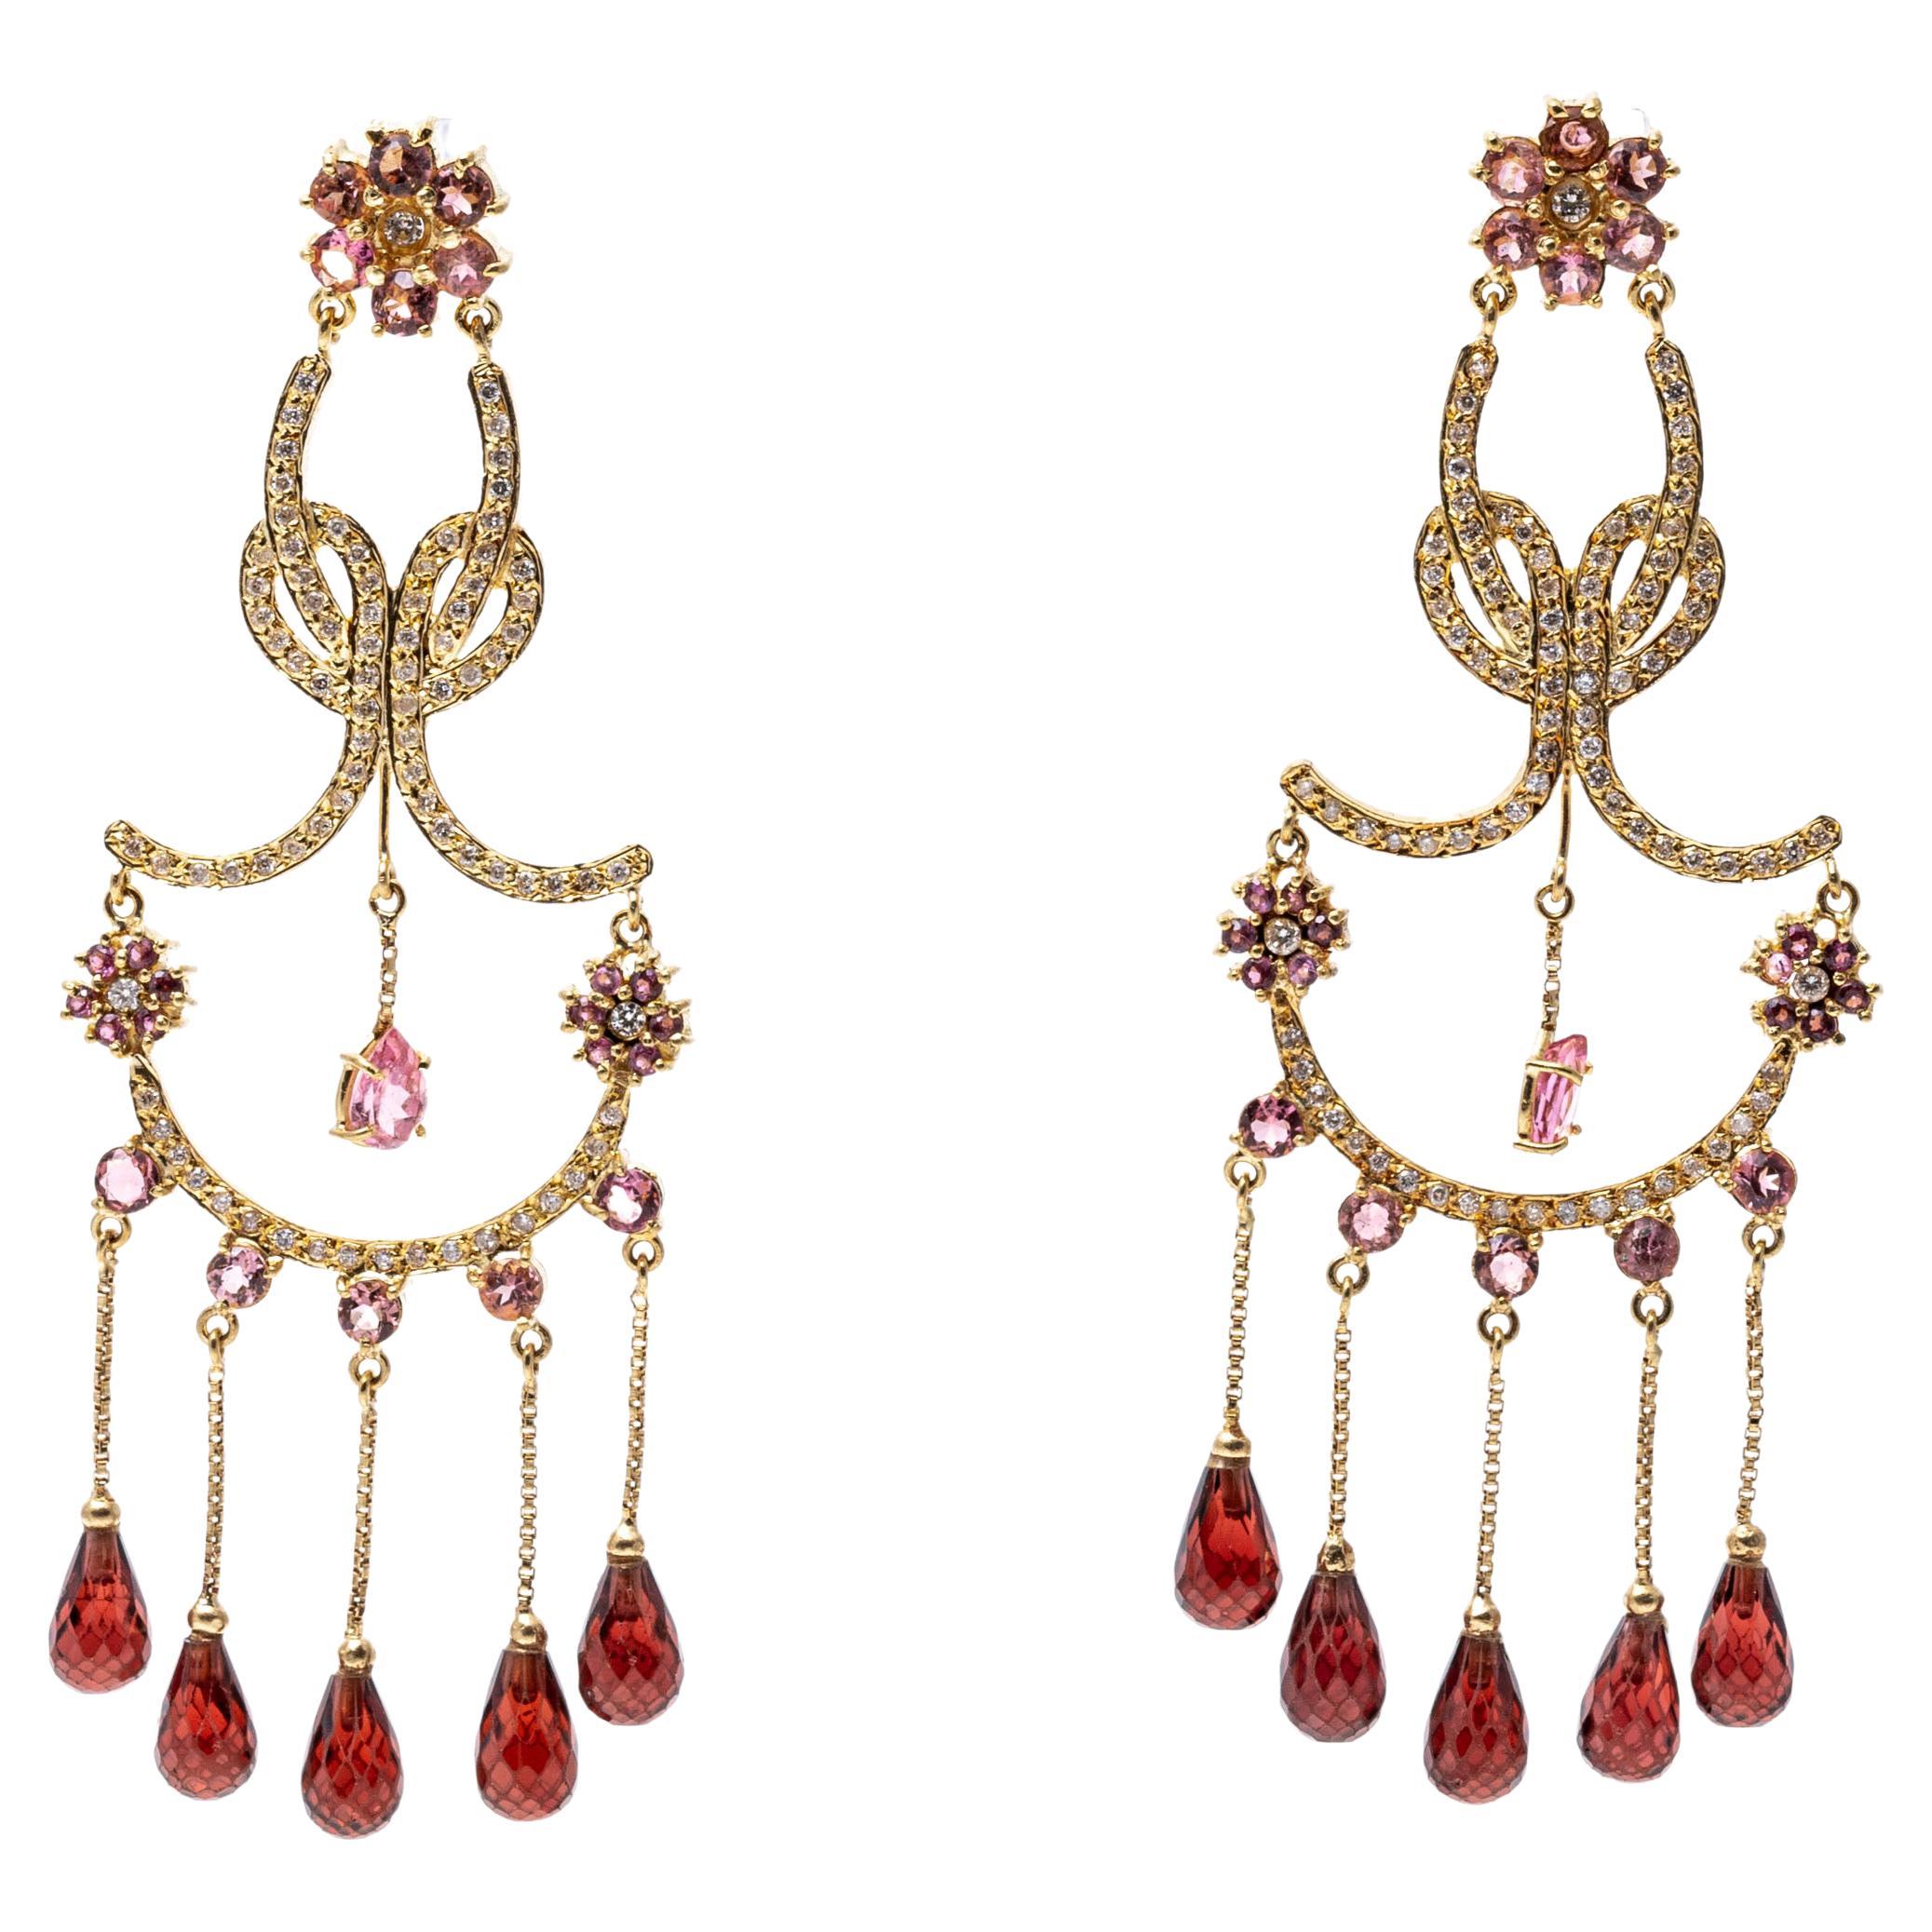 14K Gold and Diamond, Garnet and Pink Tourmaline Chandelier Earrings For Sale